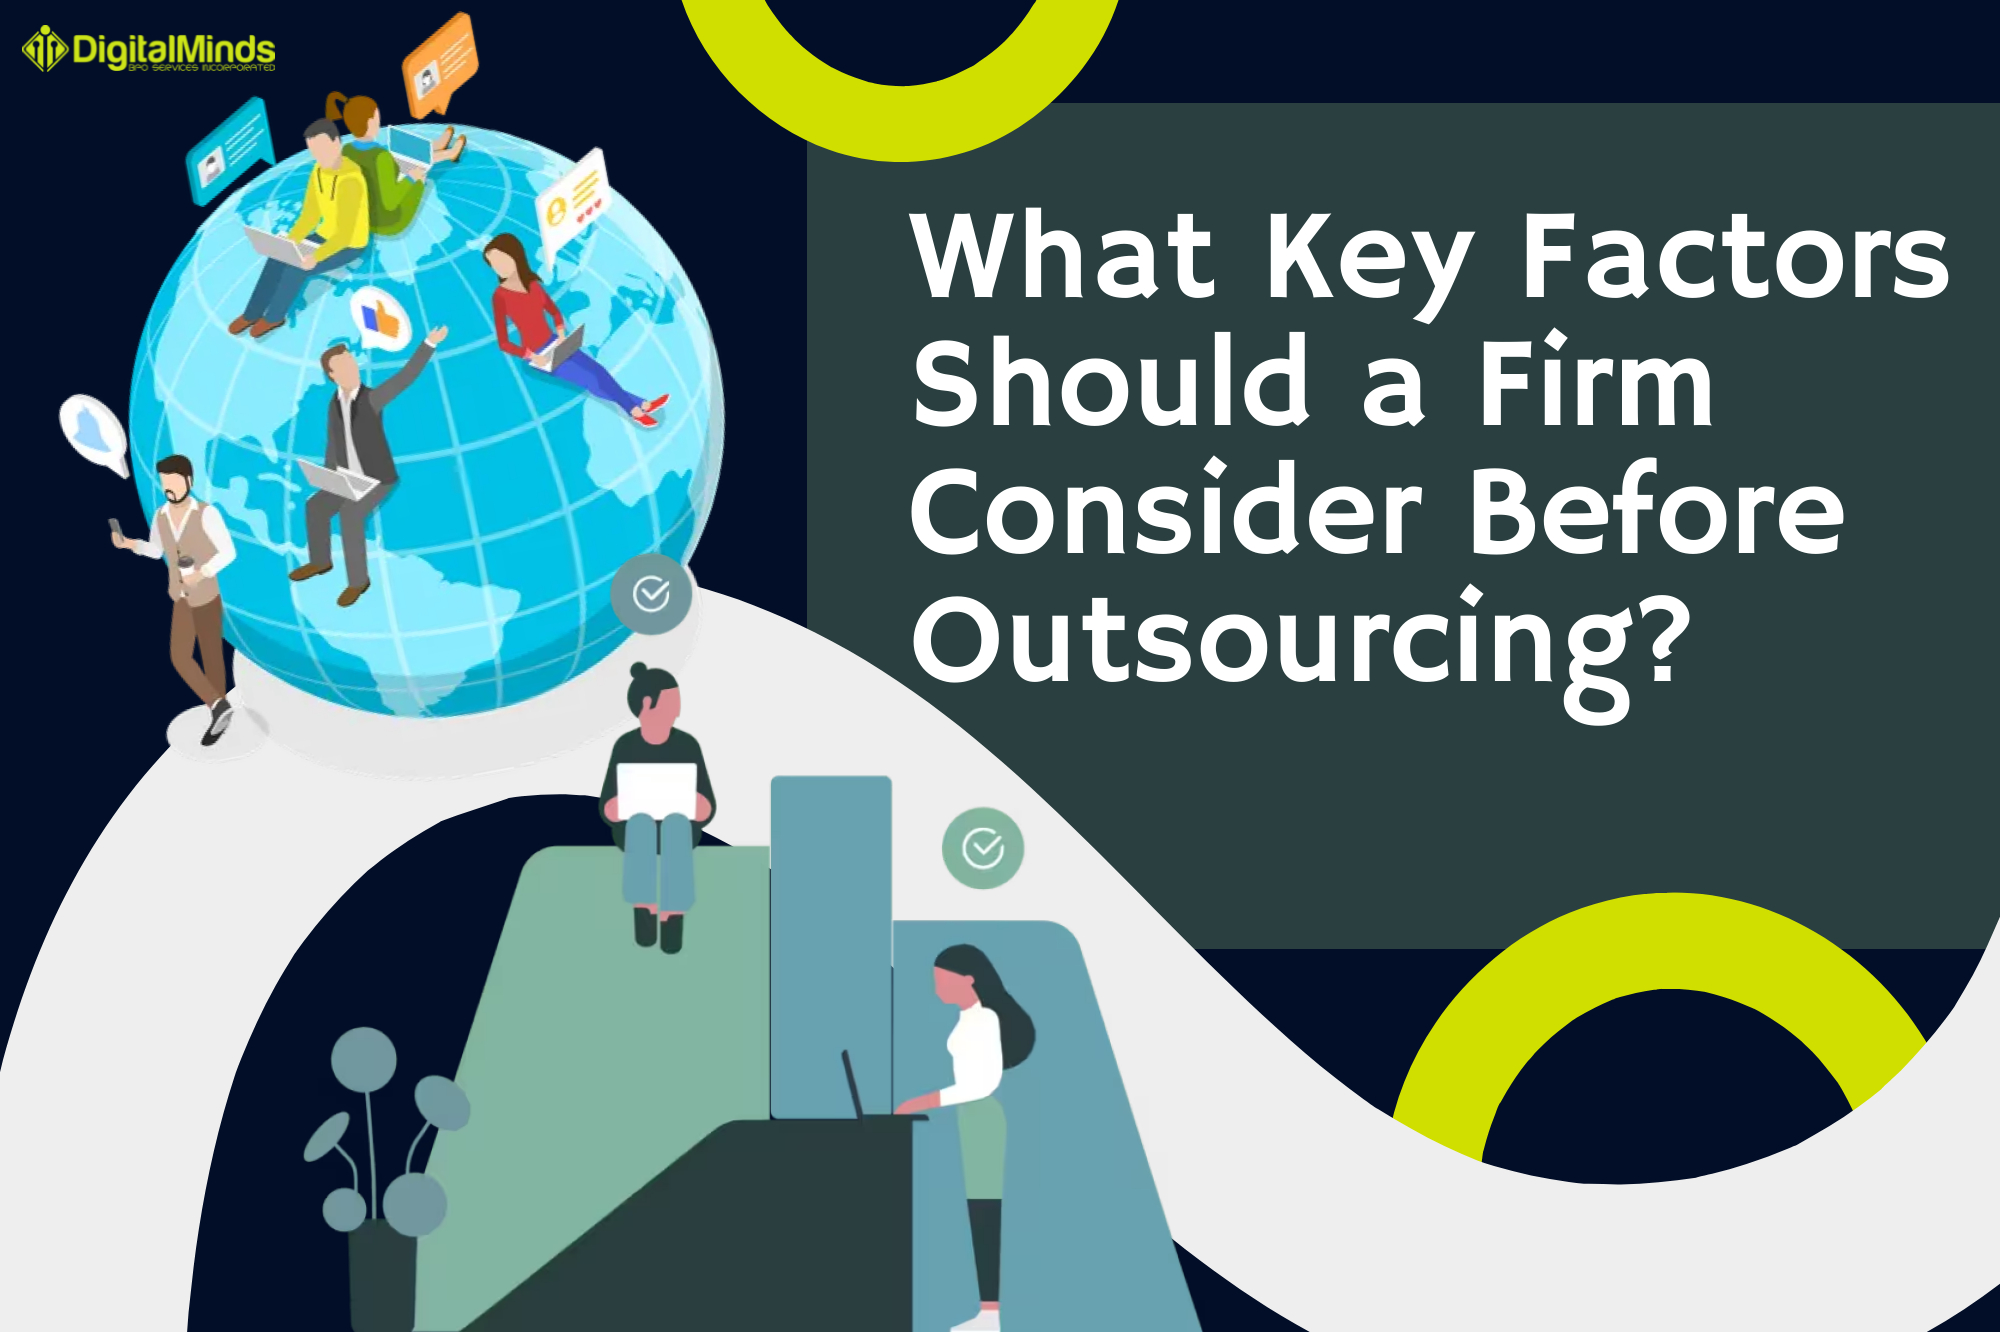 What key factors should consider a firm before outsourcing?.